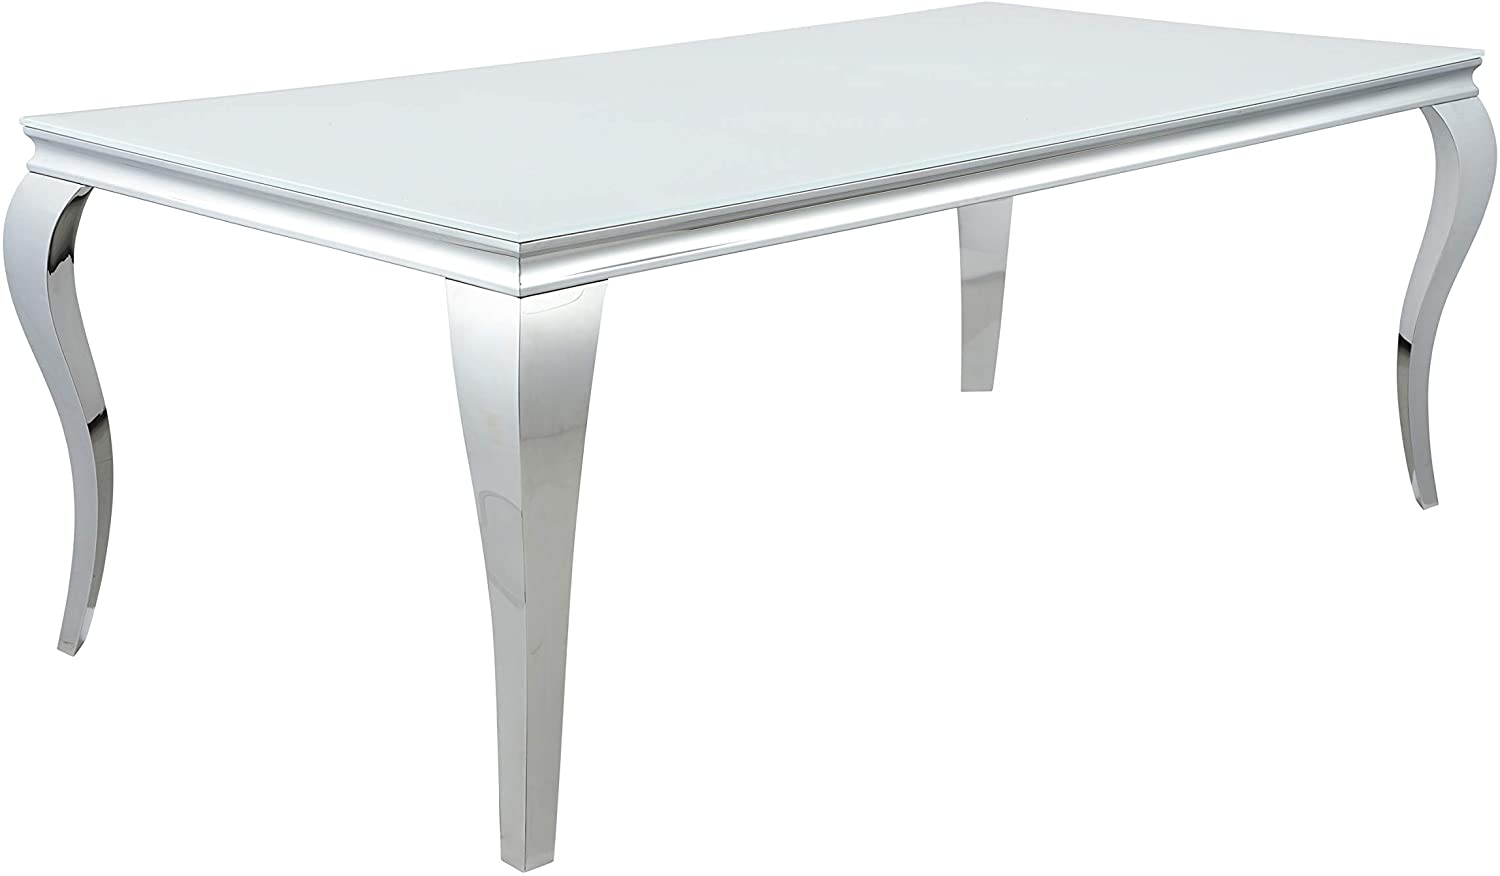 B08HRTT8PD Coaster Home Furnishings Carone Rectangular Glass Top White and Chrome Dining Table